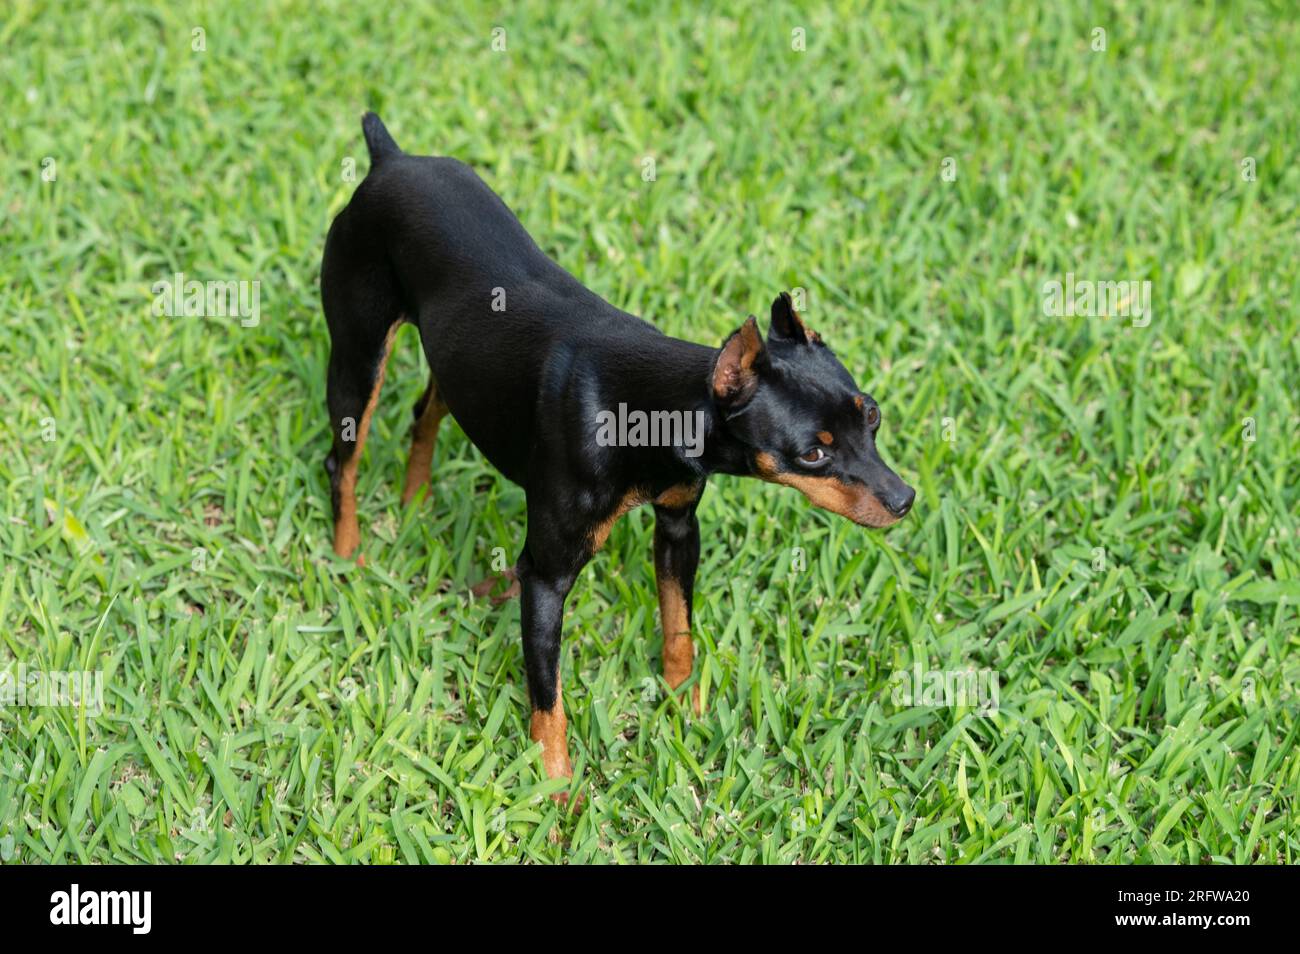 Curious pincher dog stand on grass on bright sunny day Stock Photo